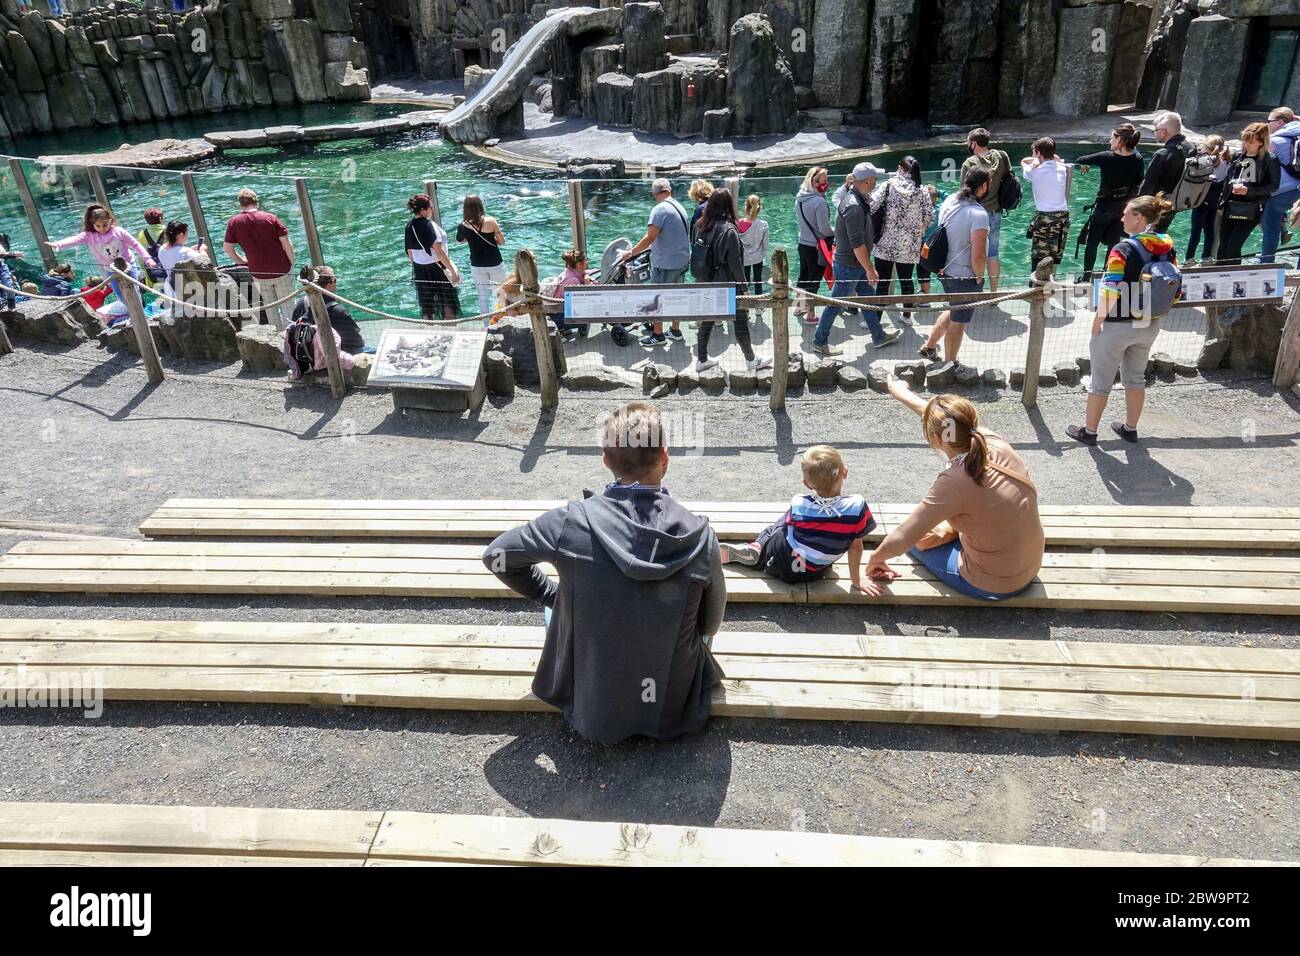 People, visitors, look at sea lions in the Prague Zoo, a good event for a day trip for family with children Prague daily life Stock Photo